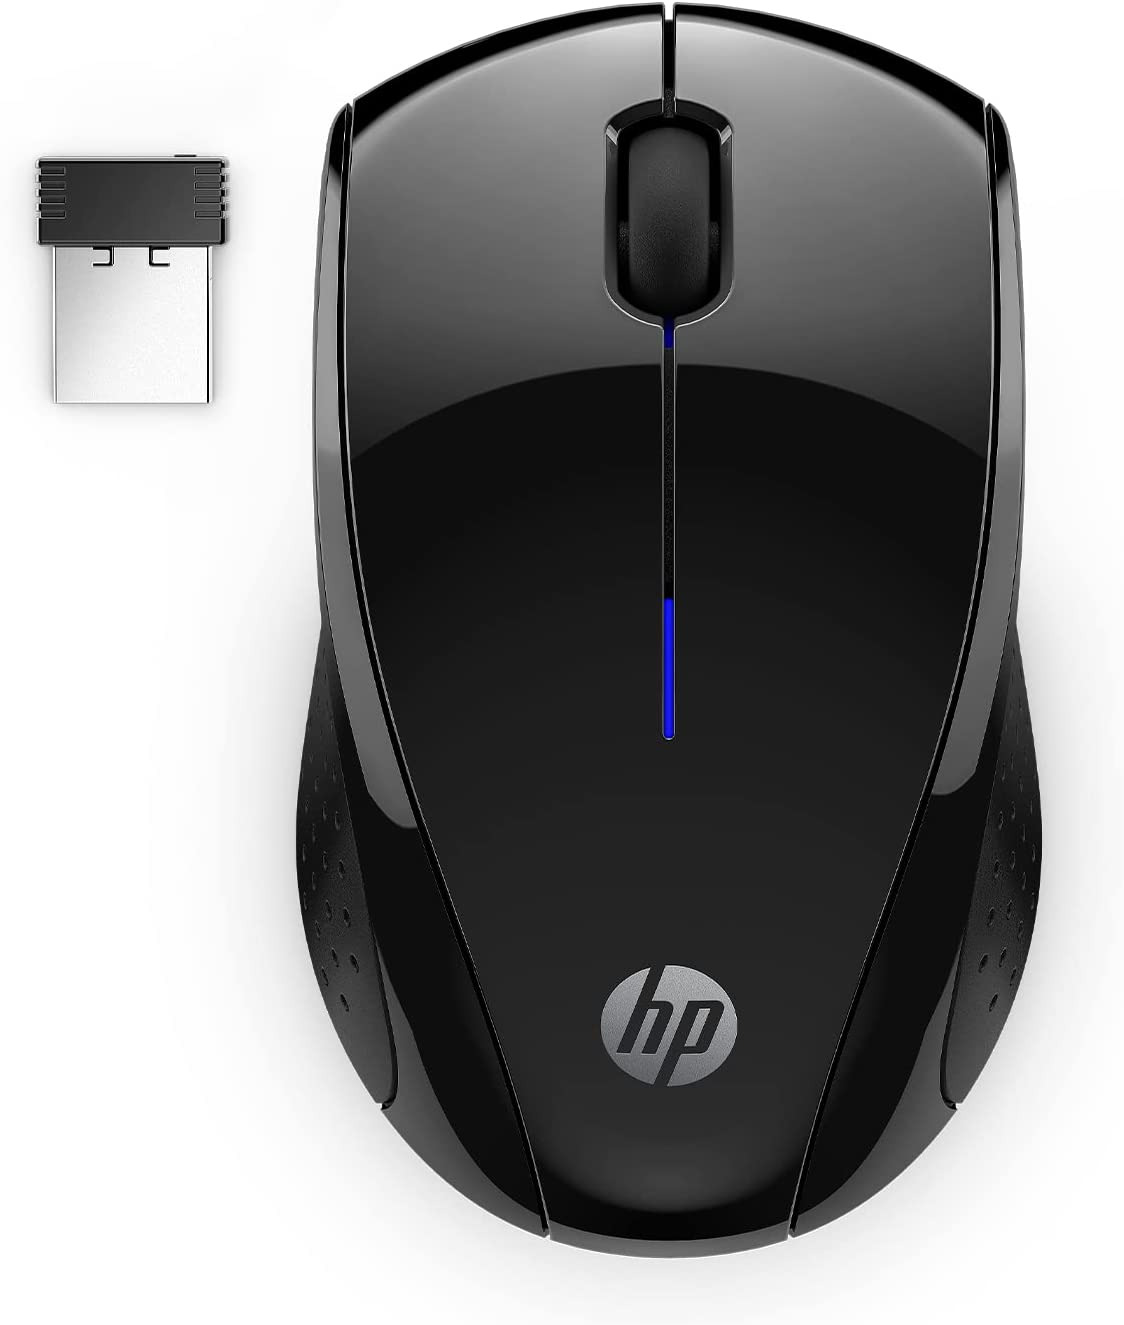 HP X3000 G3 Wireless Mouse - Black, 15-Month Battery, Side Grips for Control